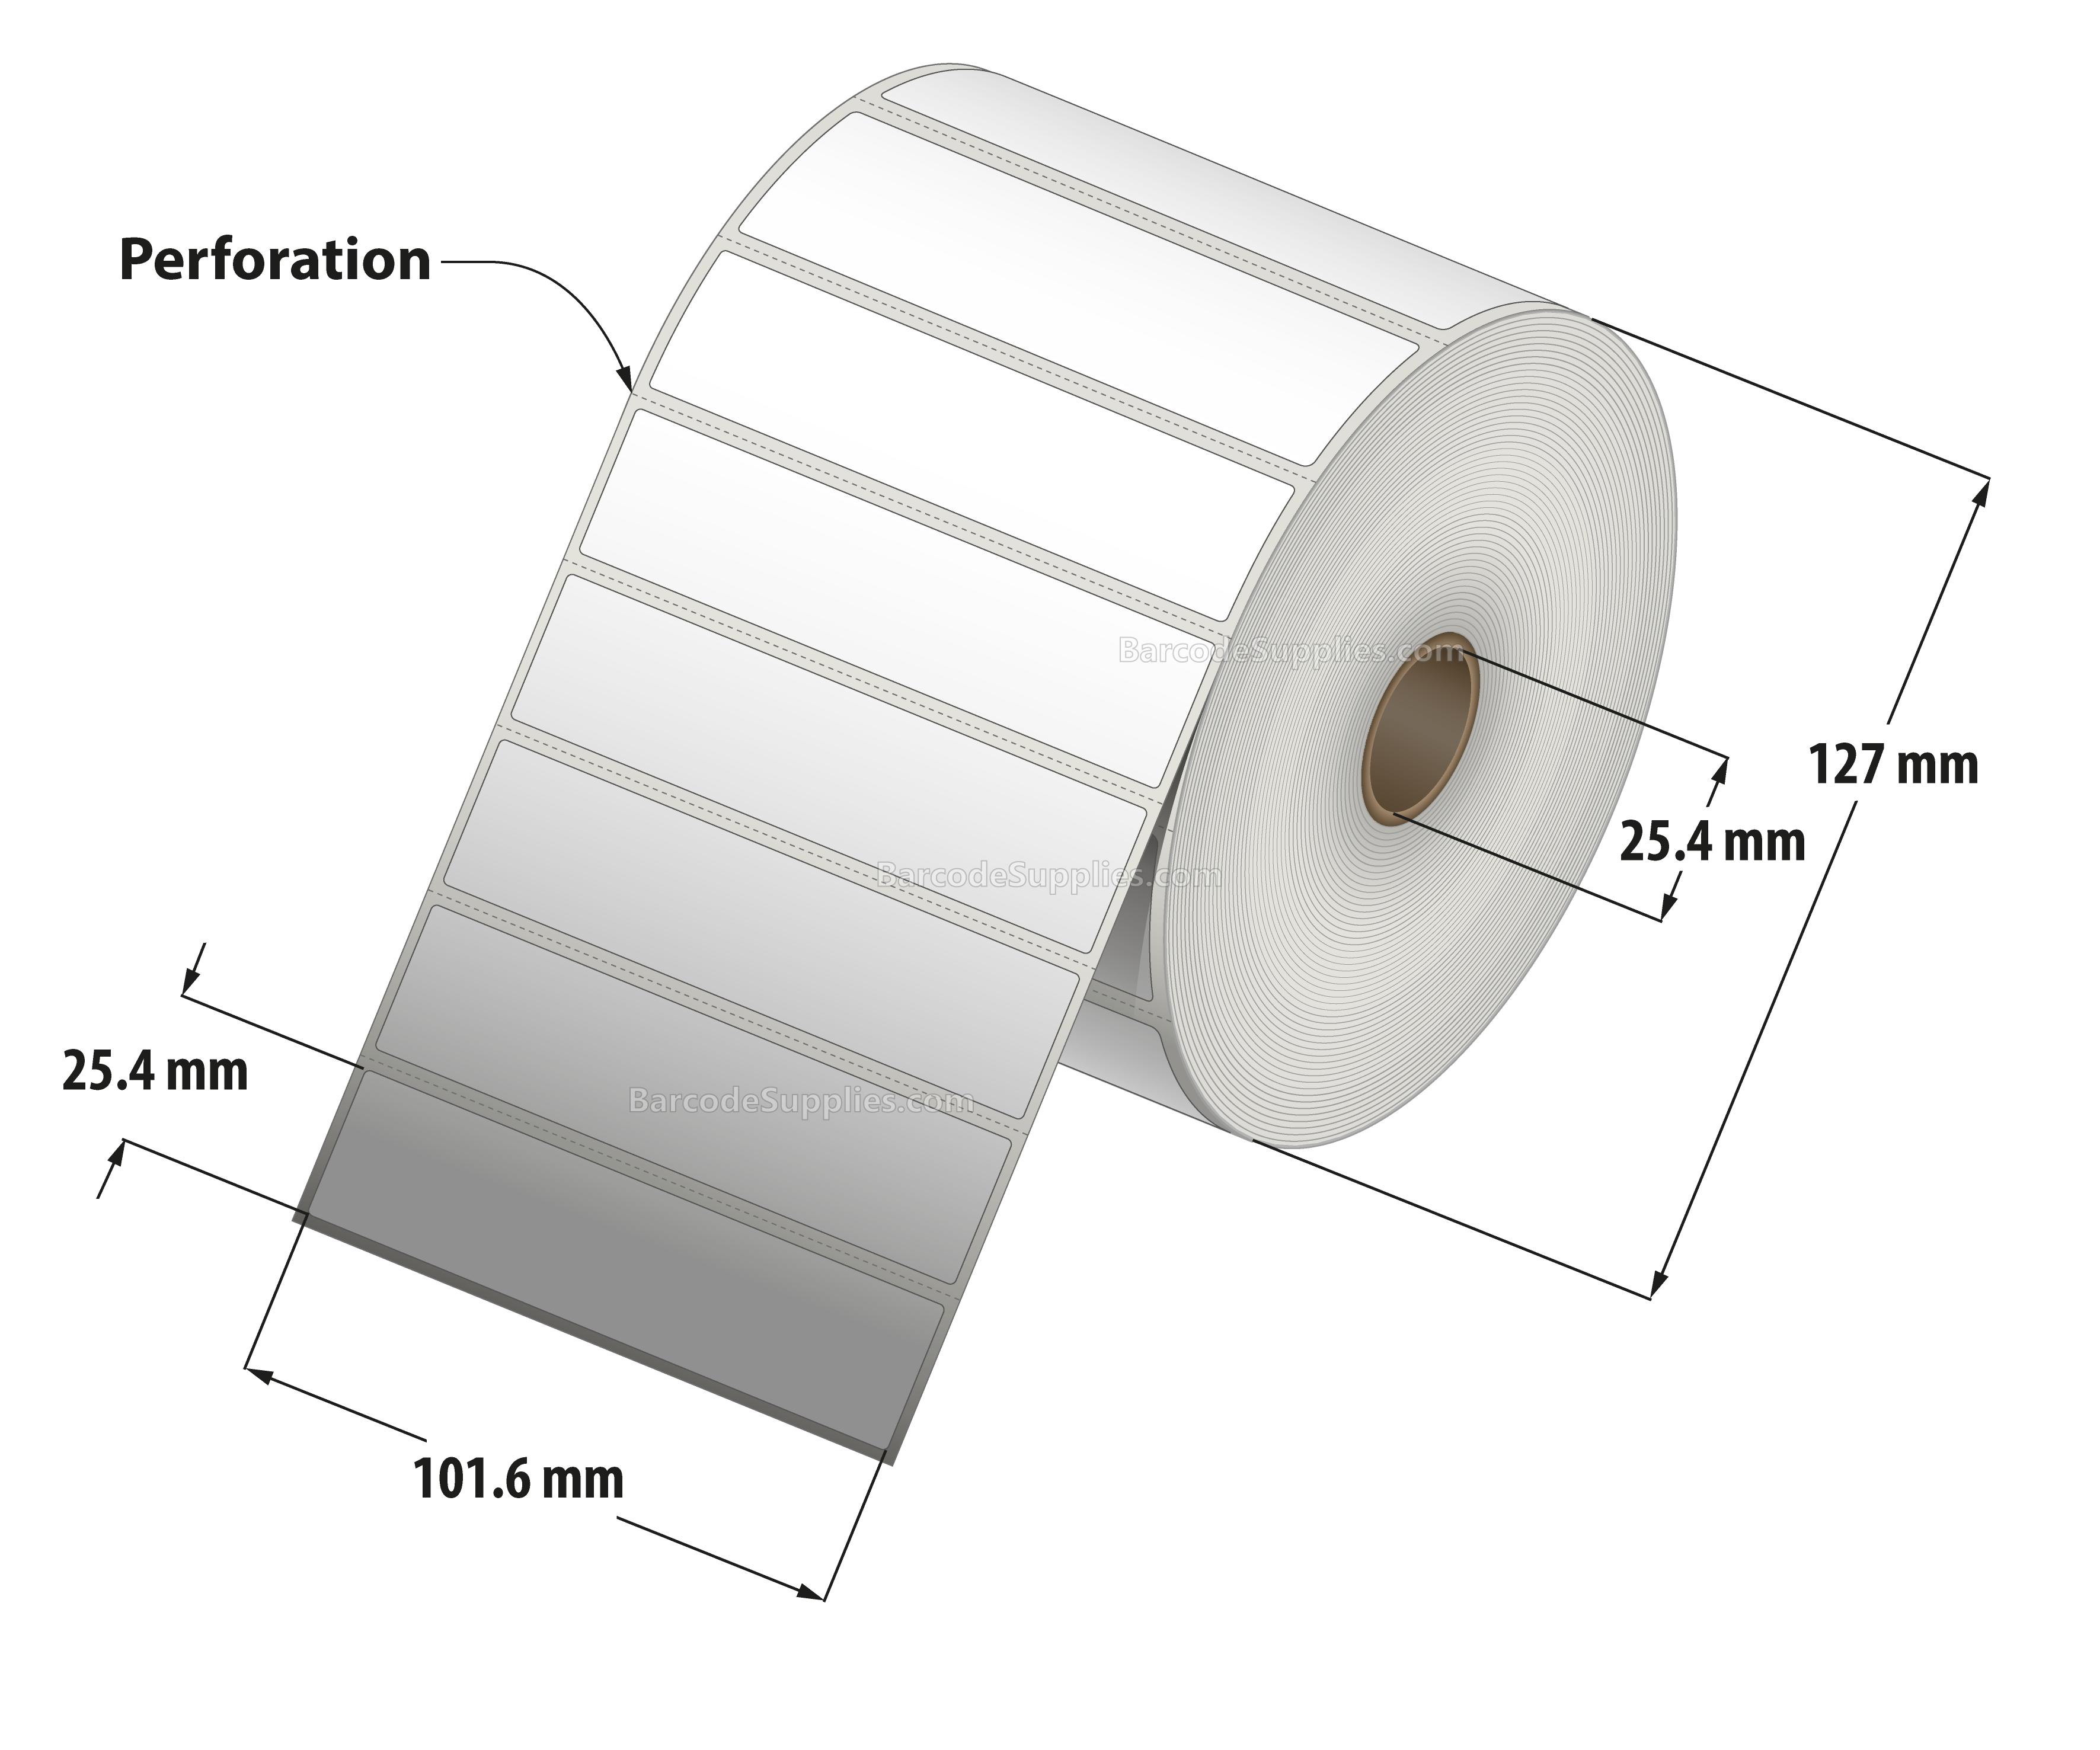 4 x 1 Thermal Transfer White Labels With Permanent Adhesive - Perforated - 2500 Labels Per Roll - Carton Of 12 Rolls - 30000 Labels Total - MPN: RT-4-1-2500-1 - BarcodeSource, Inc.